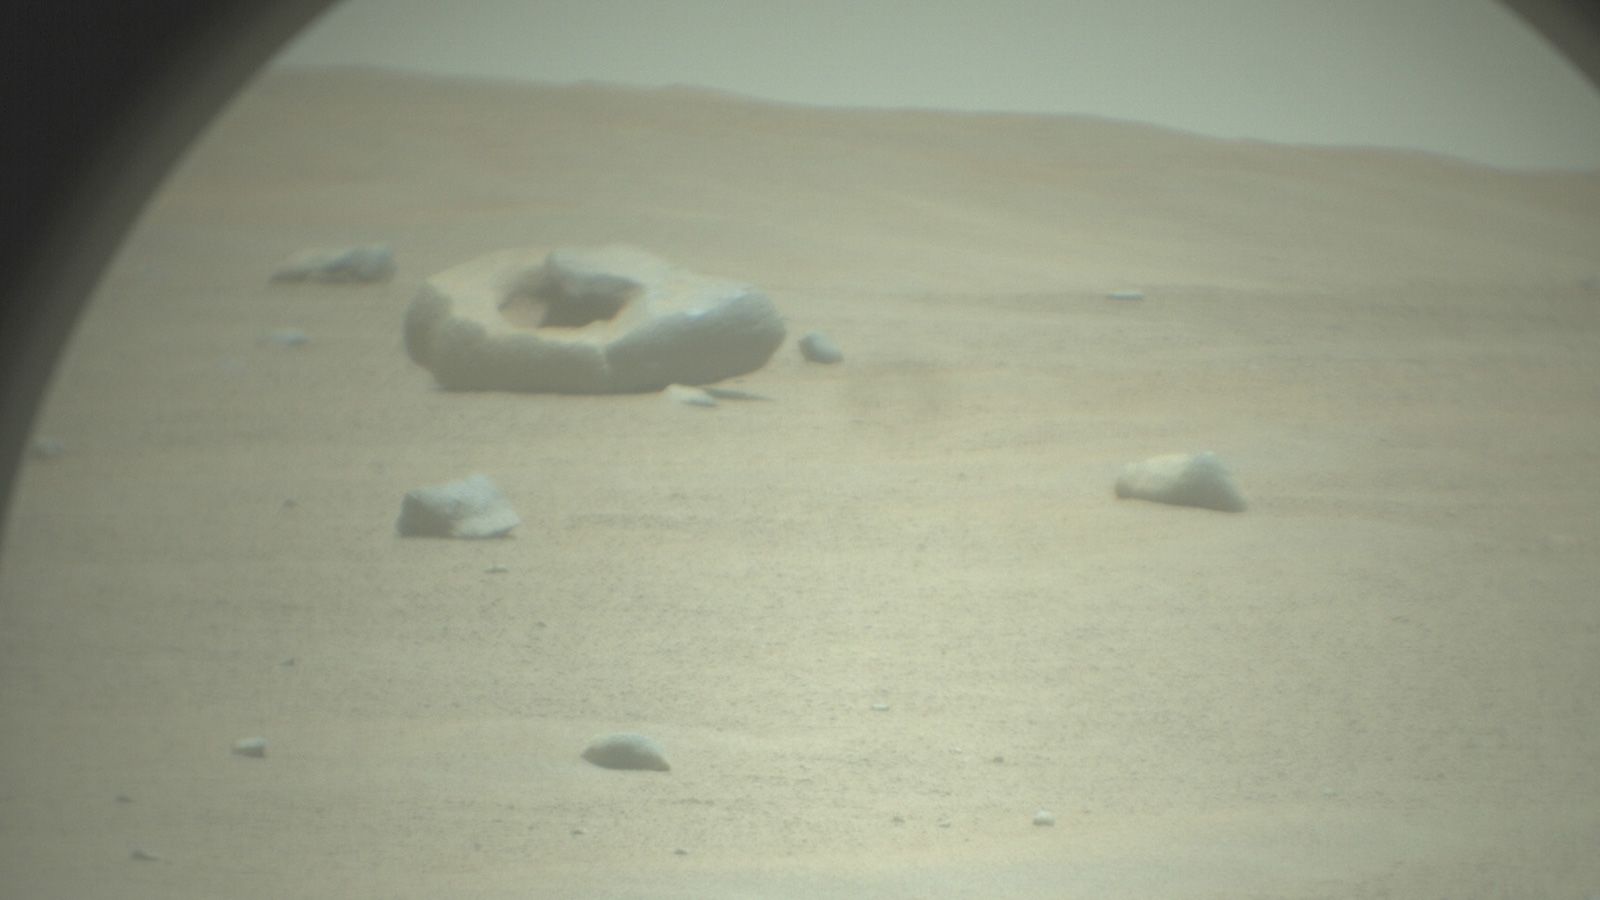 Mars \'doughnut\' spotted by Perseverance rover | CNN